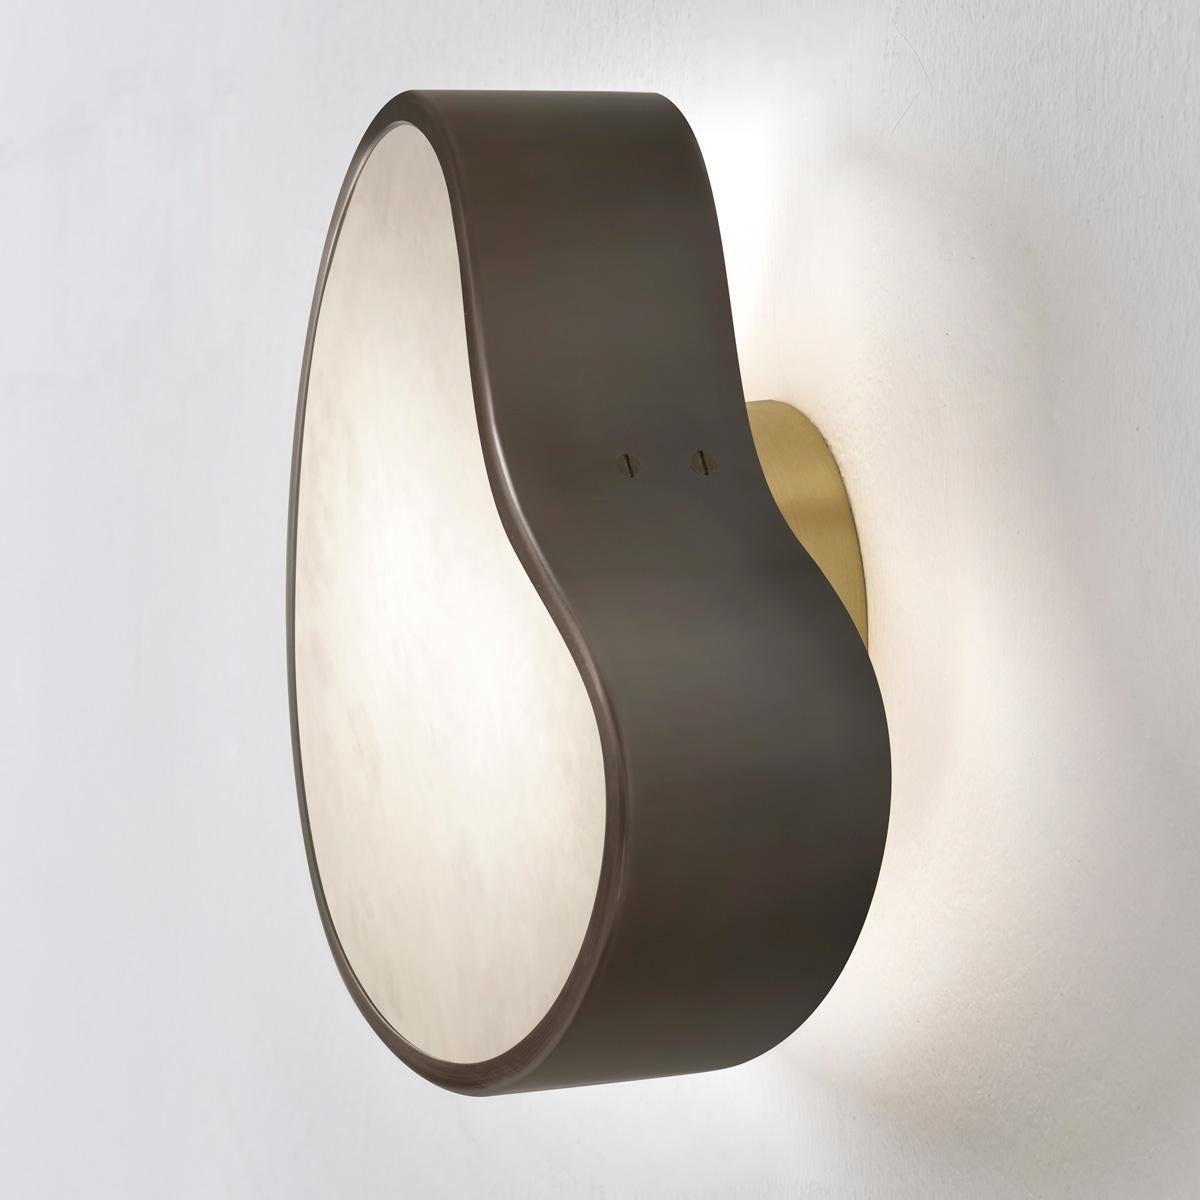 Cuore Wall Light by Gaspare Asaro. Backlit Version. Pewter Finish For Sale 3